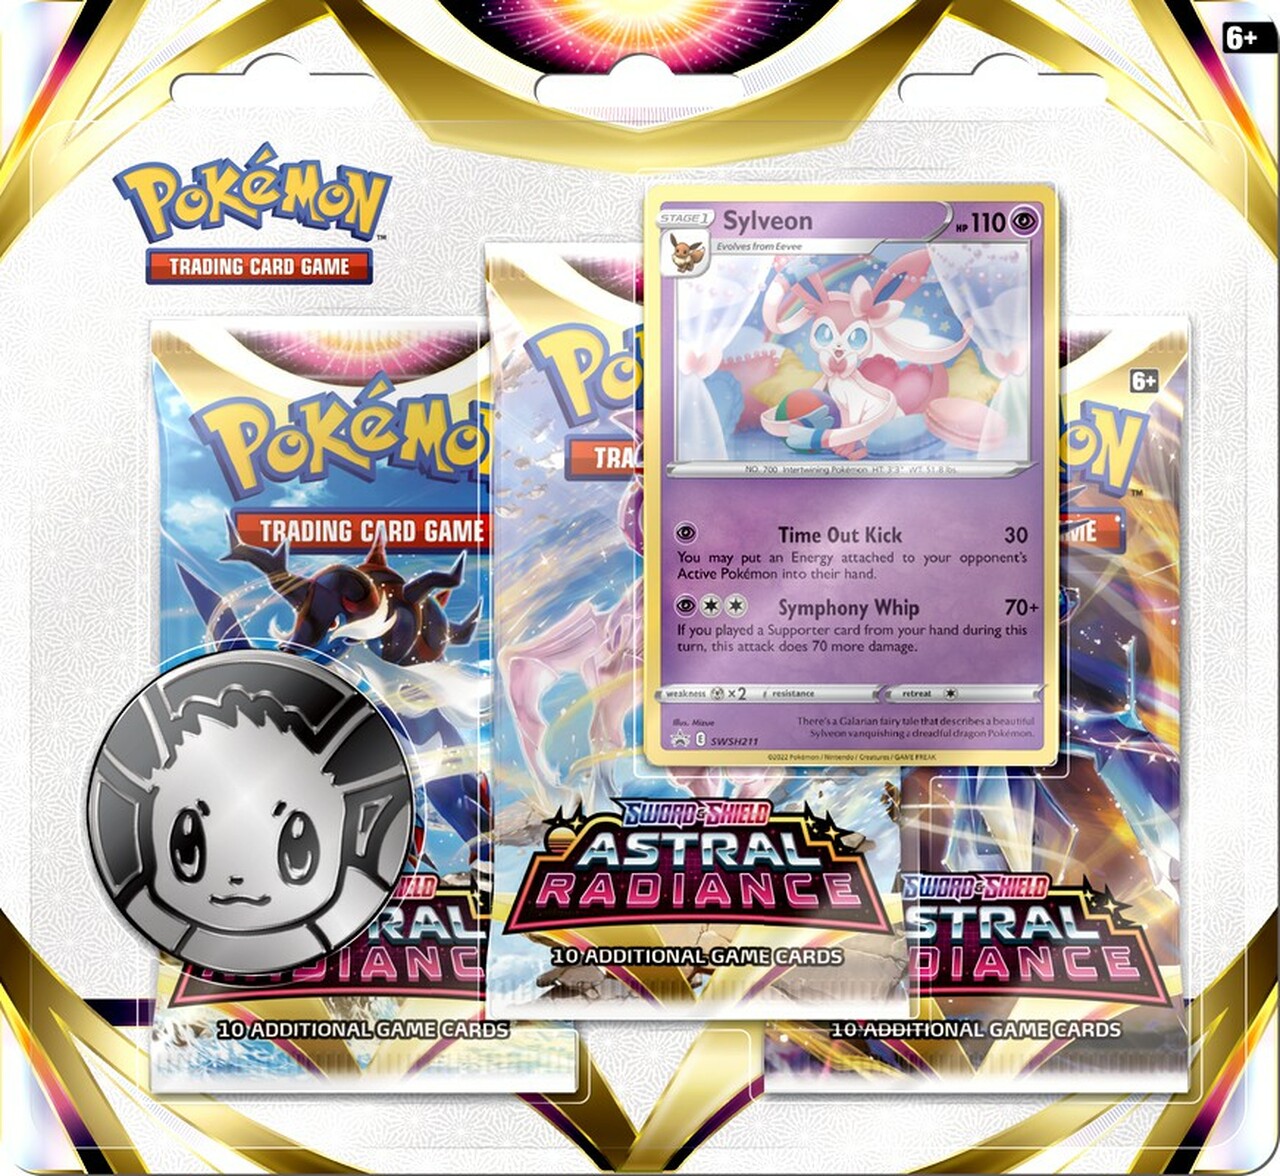 Pokemon: Sword & Shield Astral Radiance - 3-Booster Blister: Sylveon